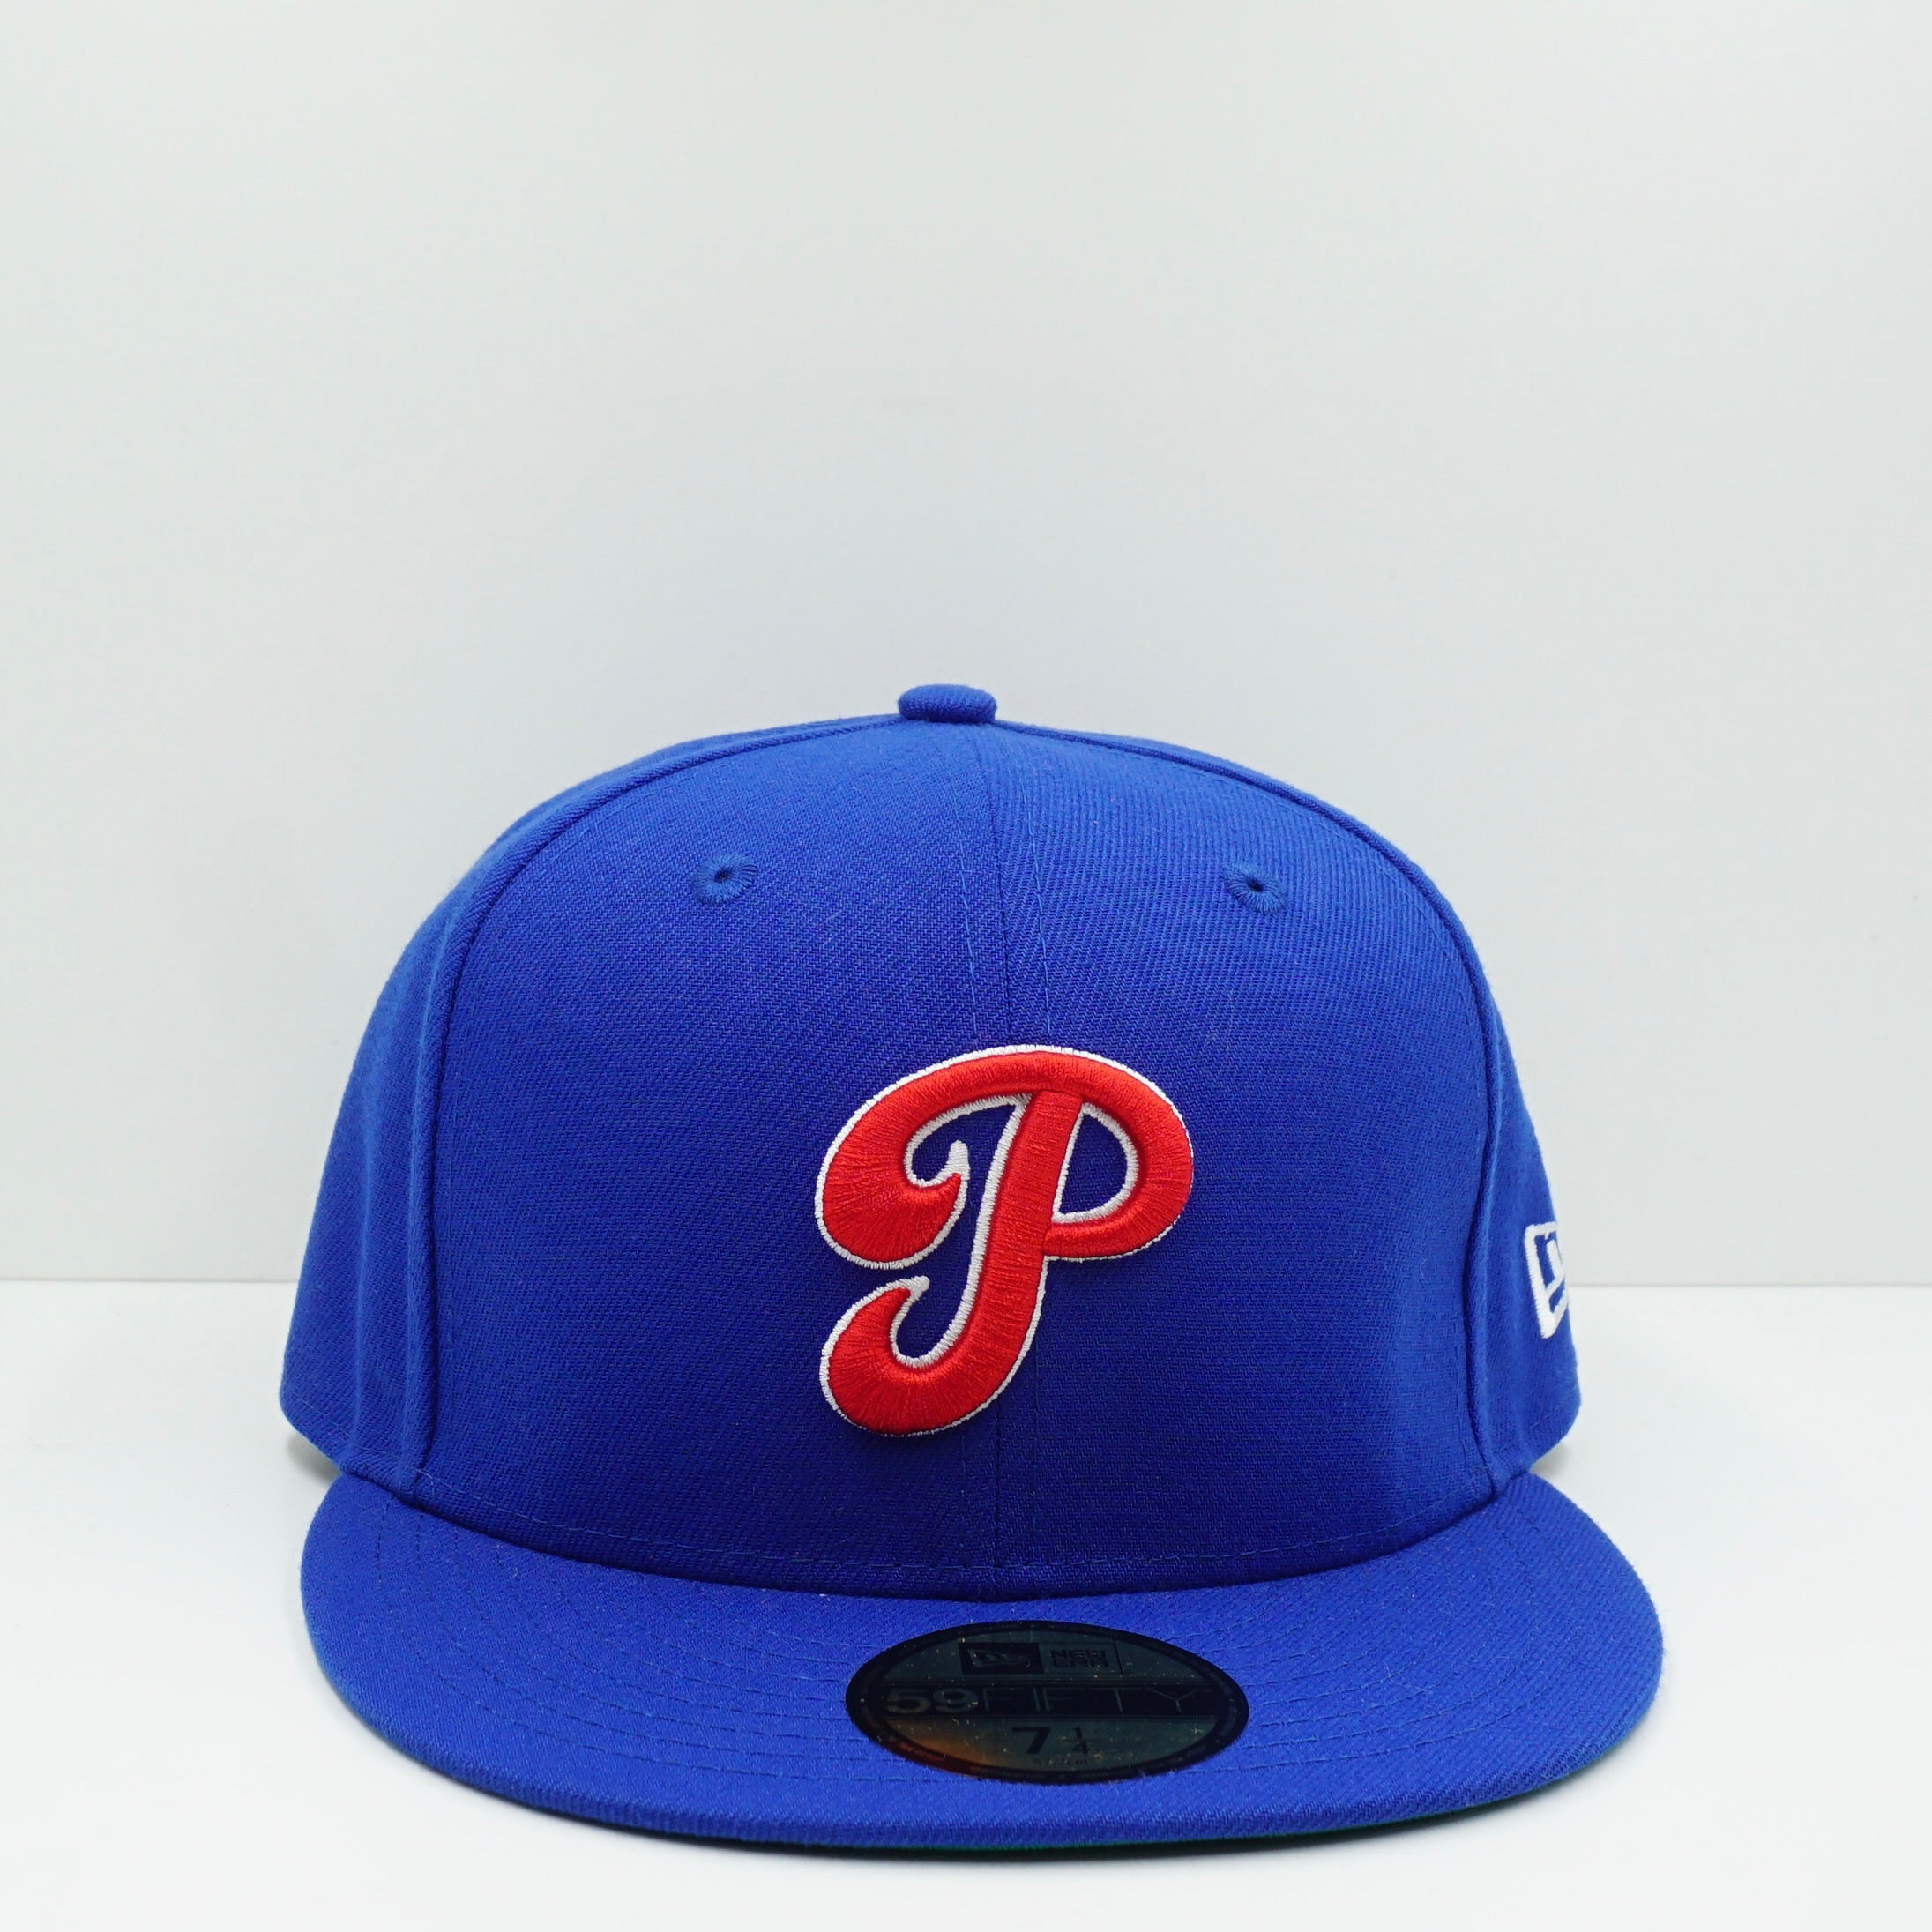 New Era Cooperstown Philadelphia Phillies Blue/Red Fitted Cap